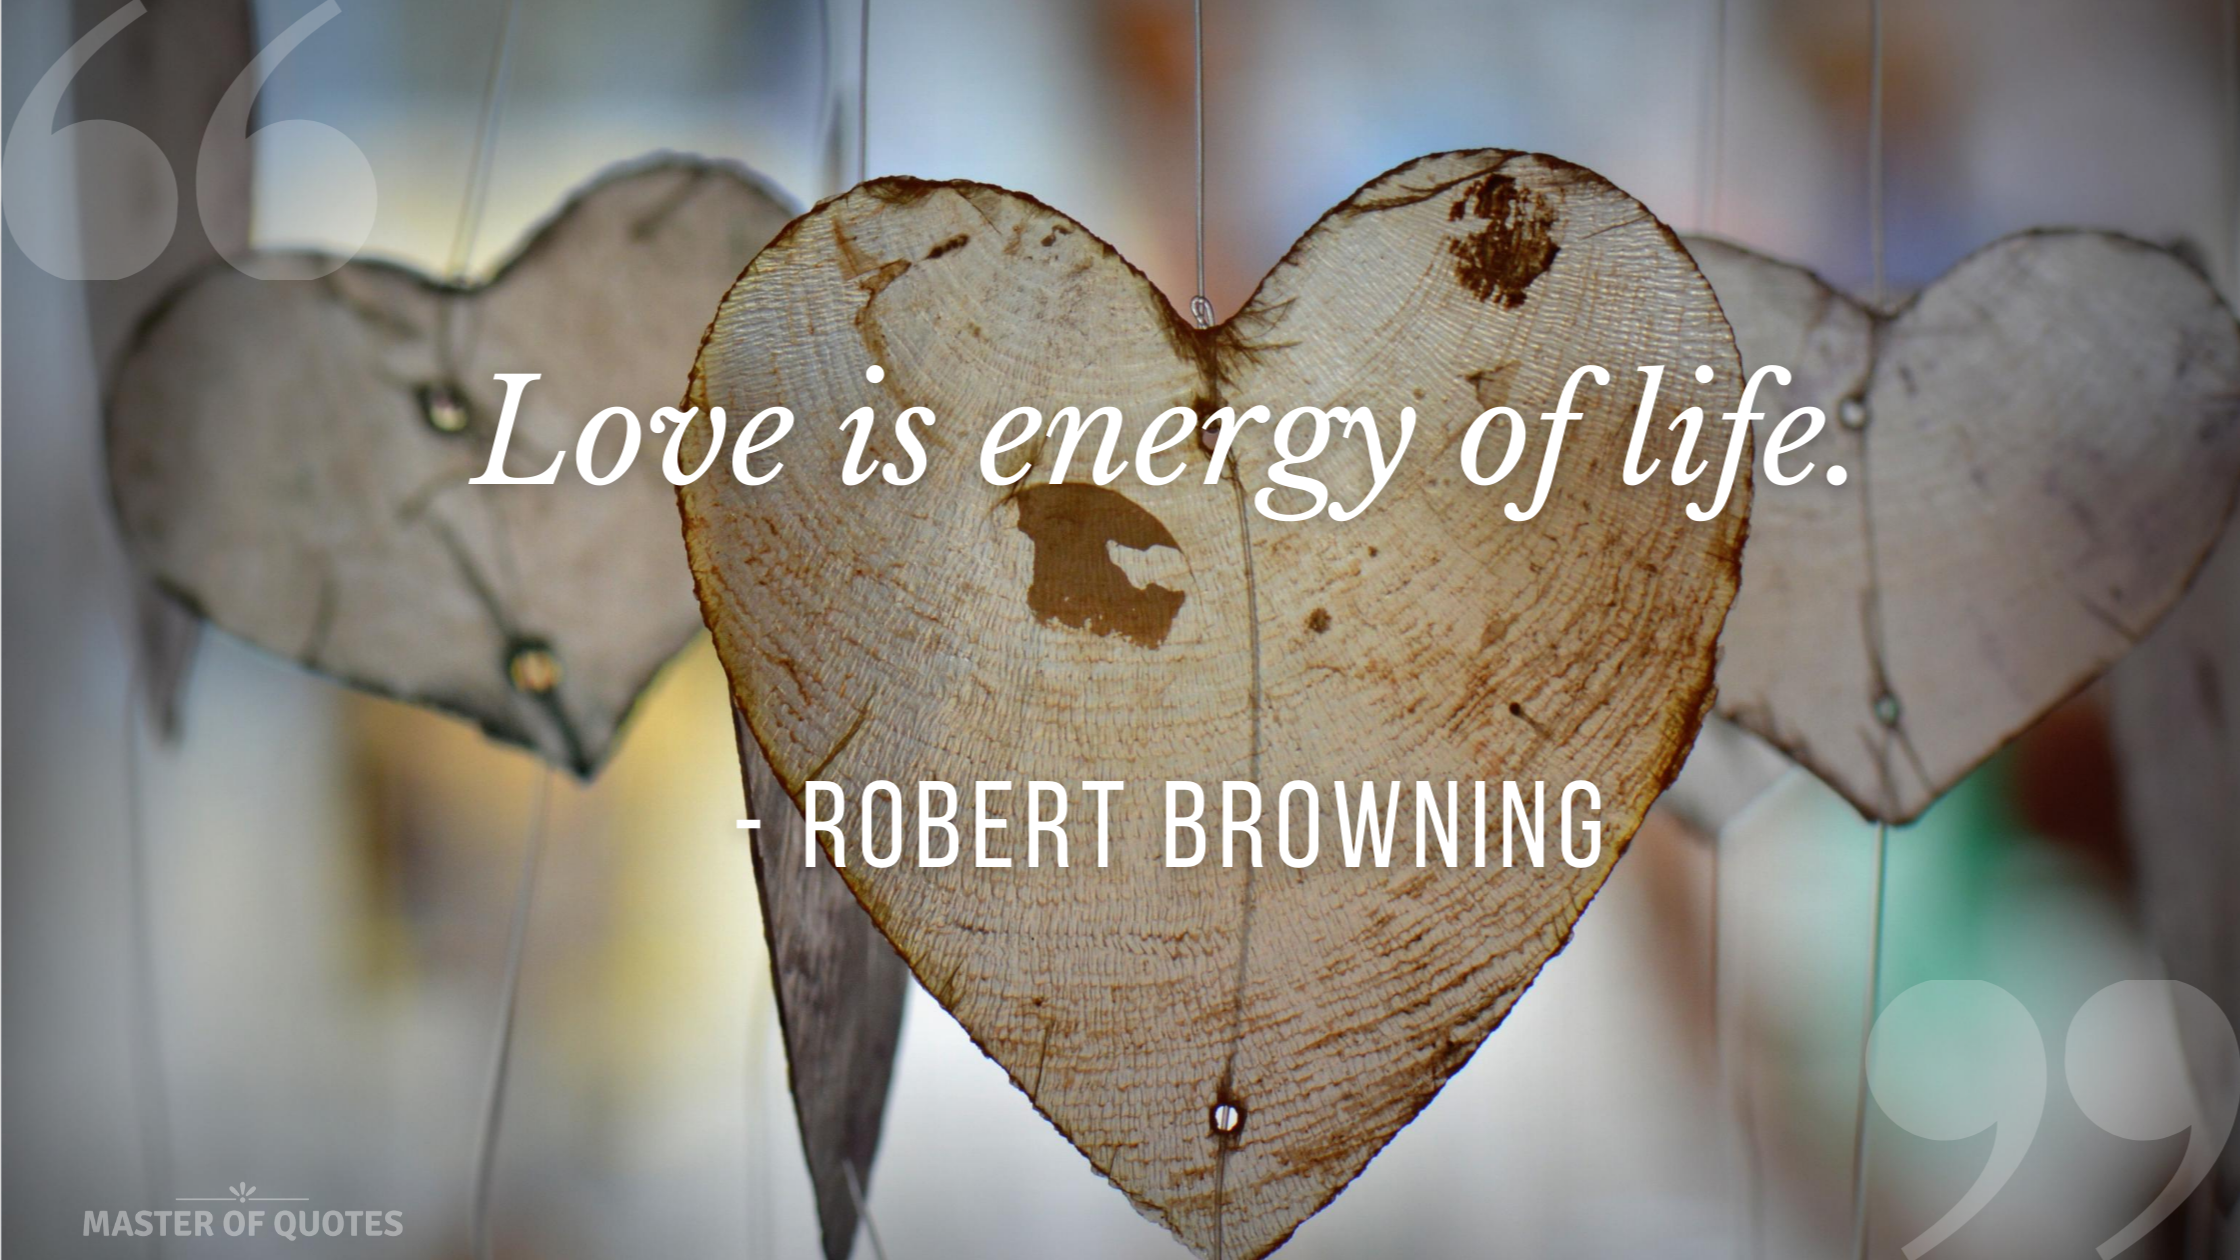 Robert Browning Quote